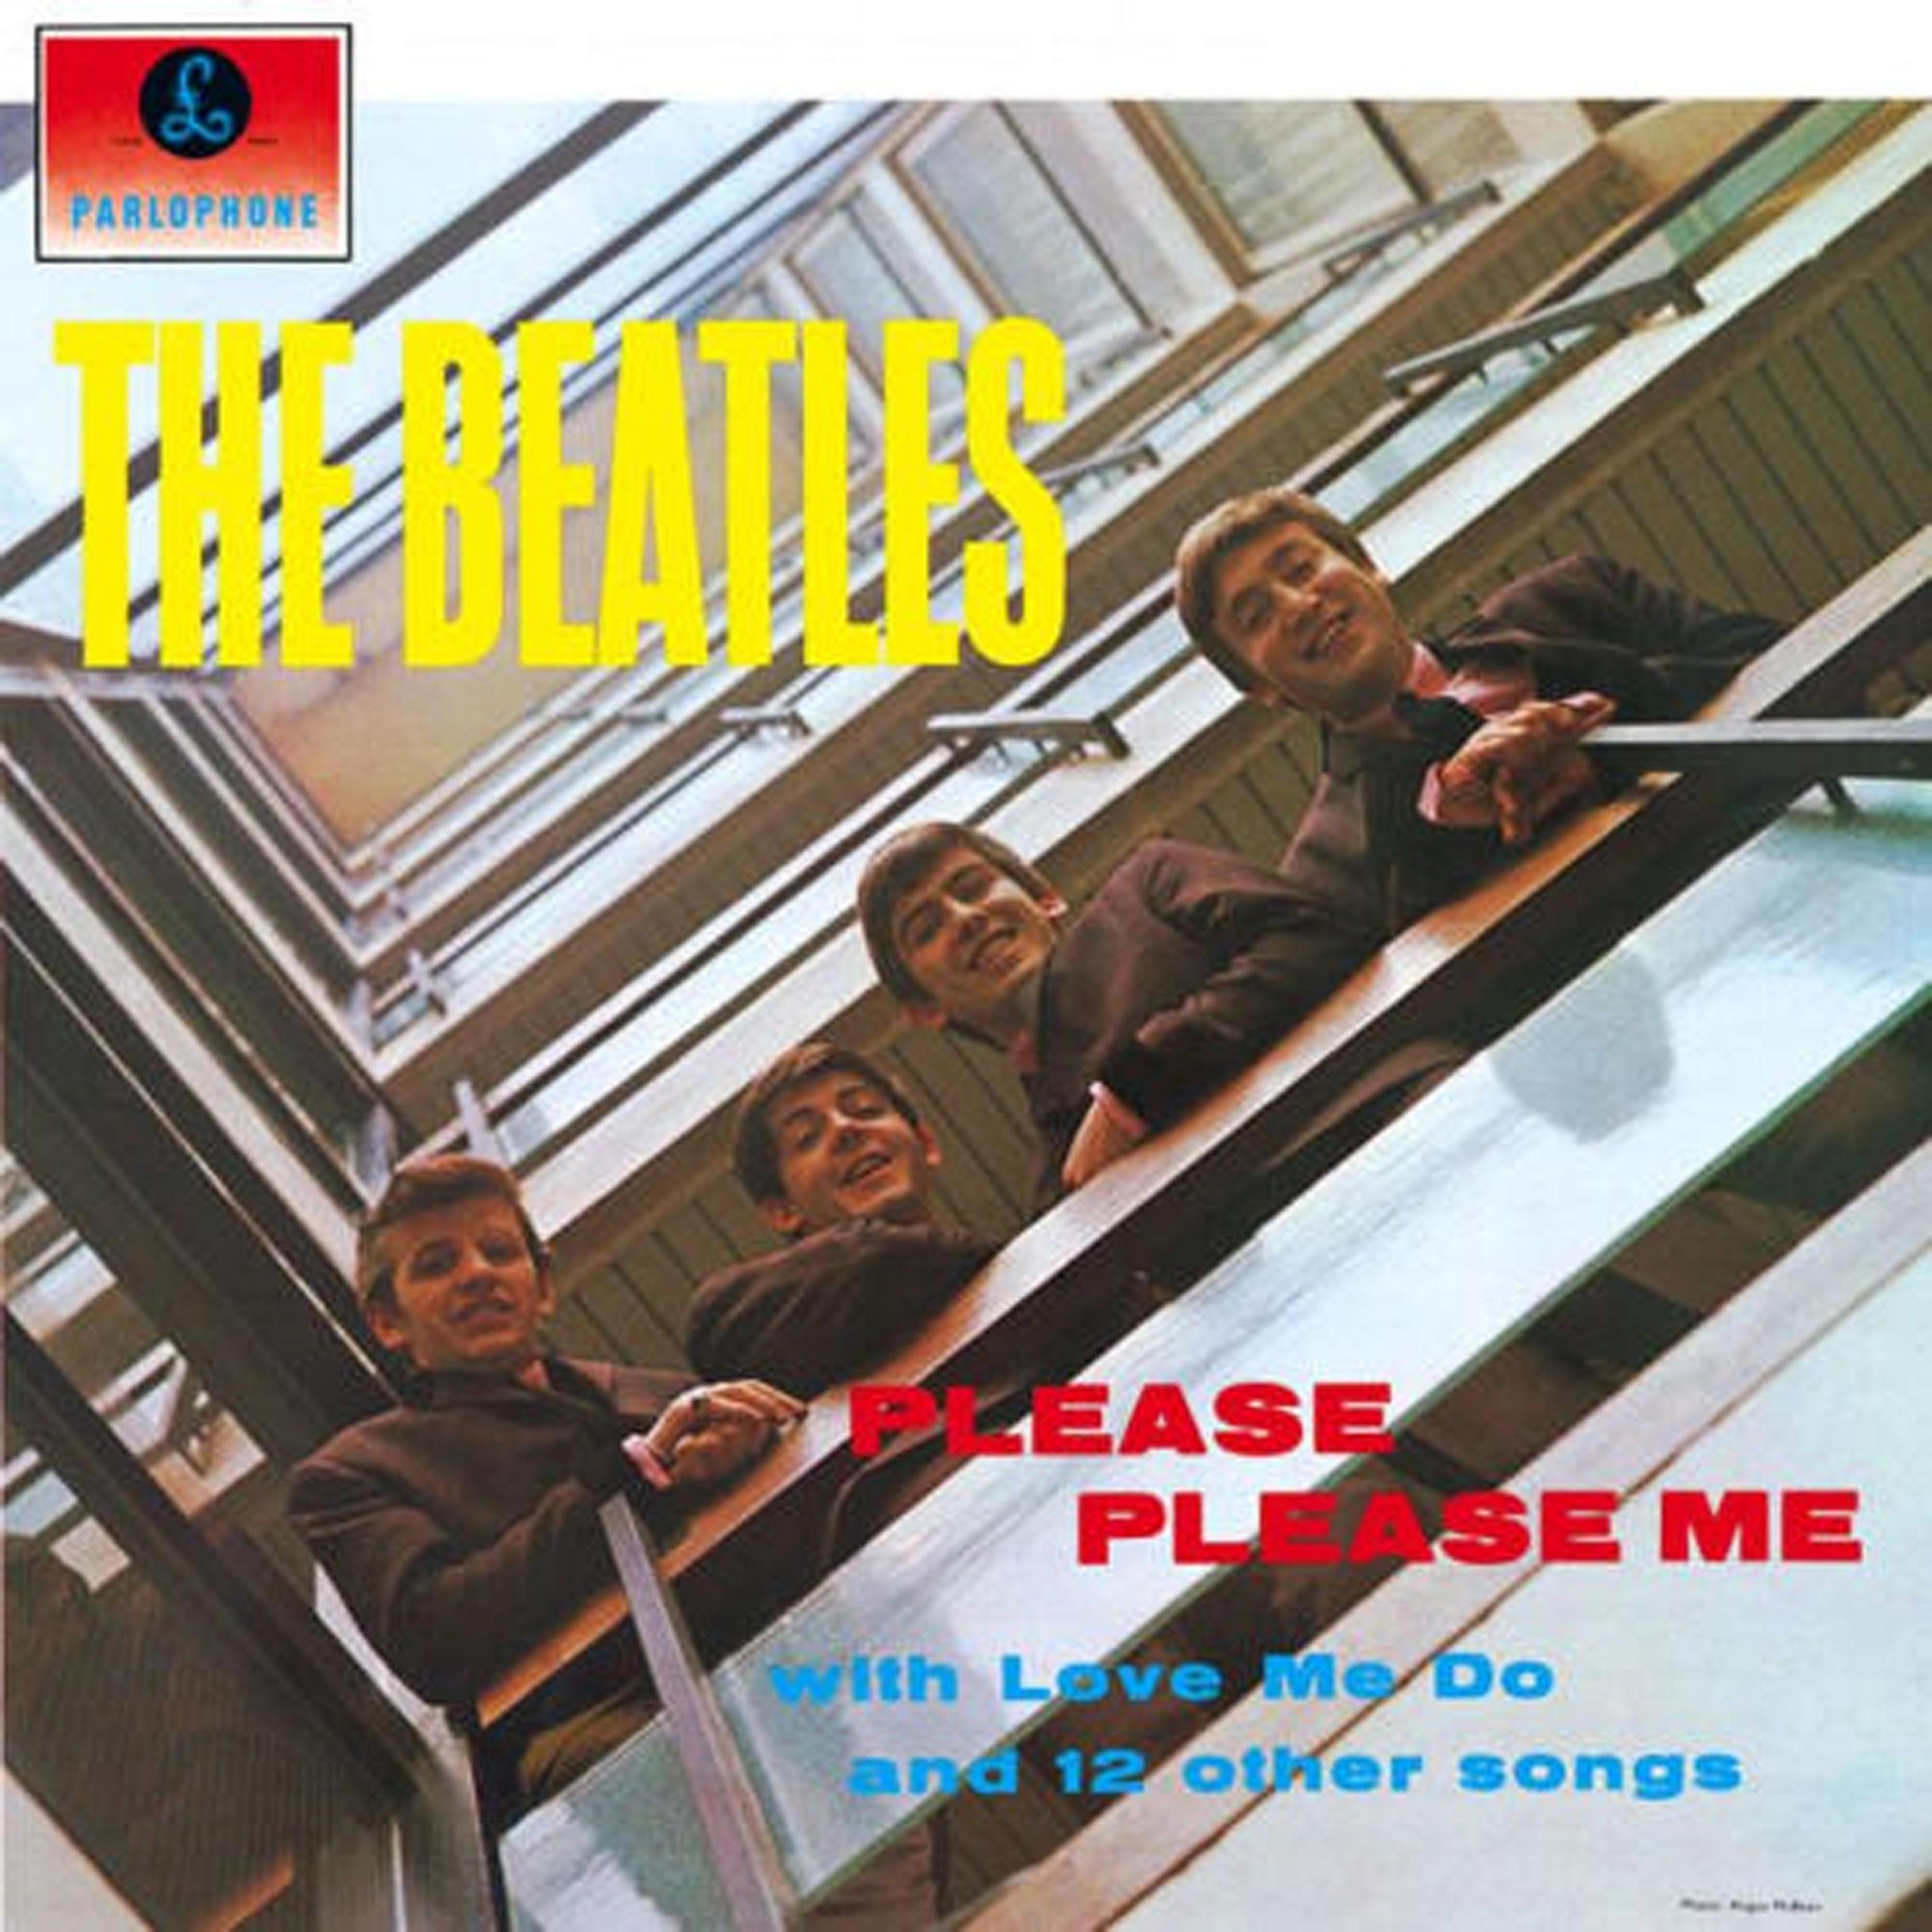 Please Please Me by The Beatles is one of the best debuts ever